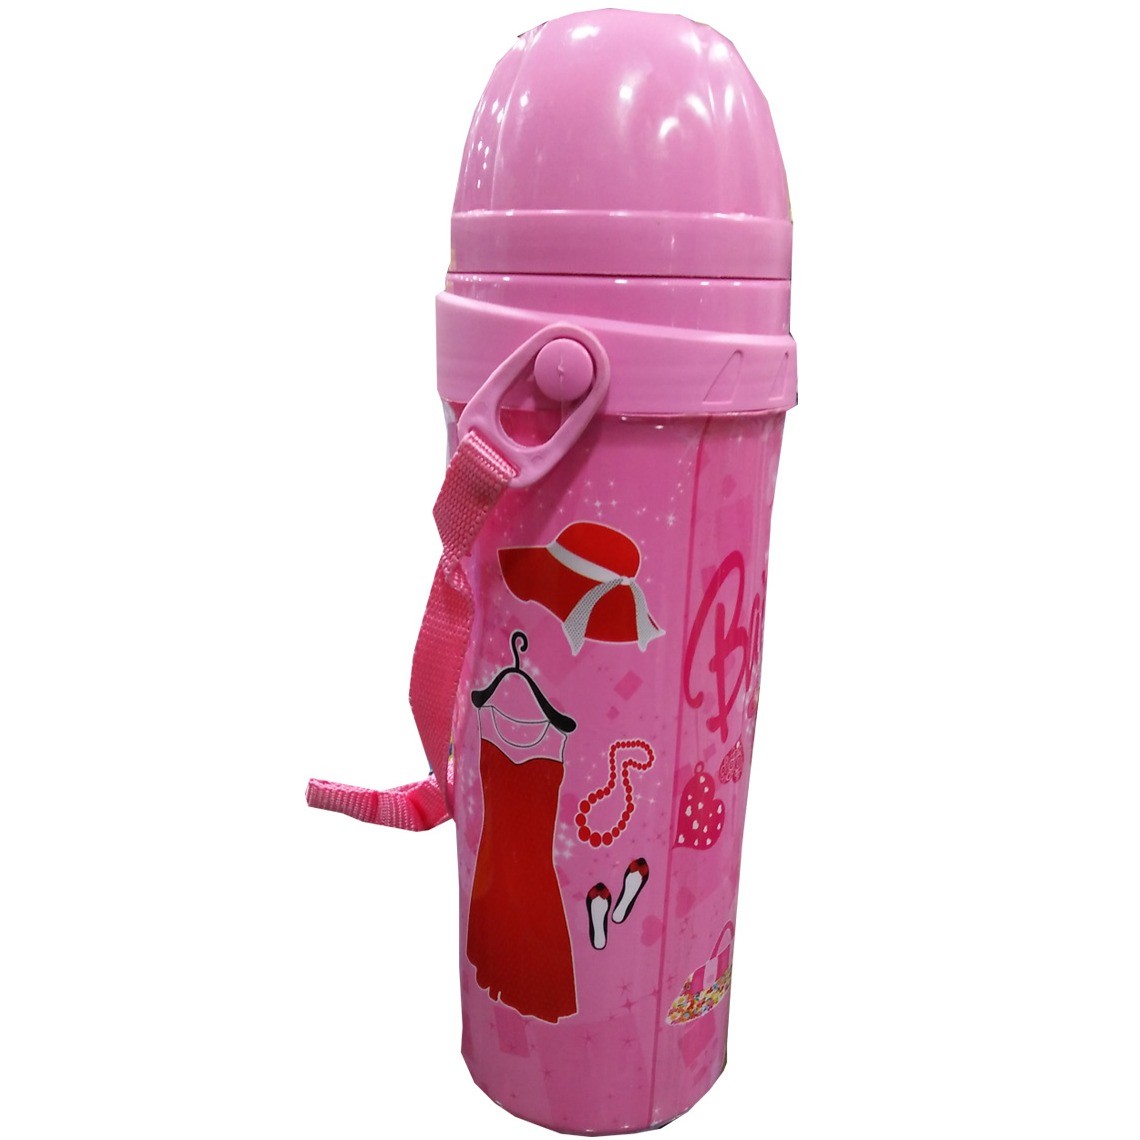 Sports Water Bottle for Girls - Pink